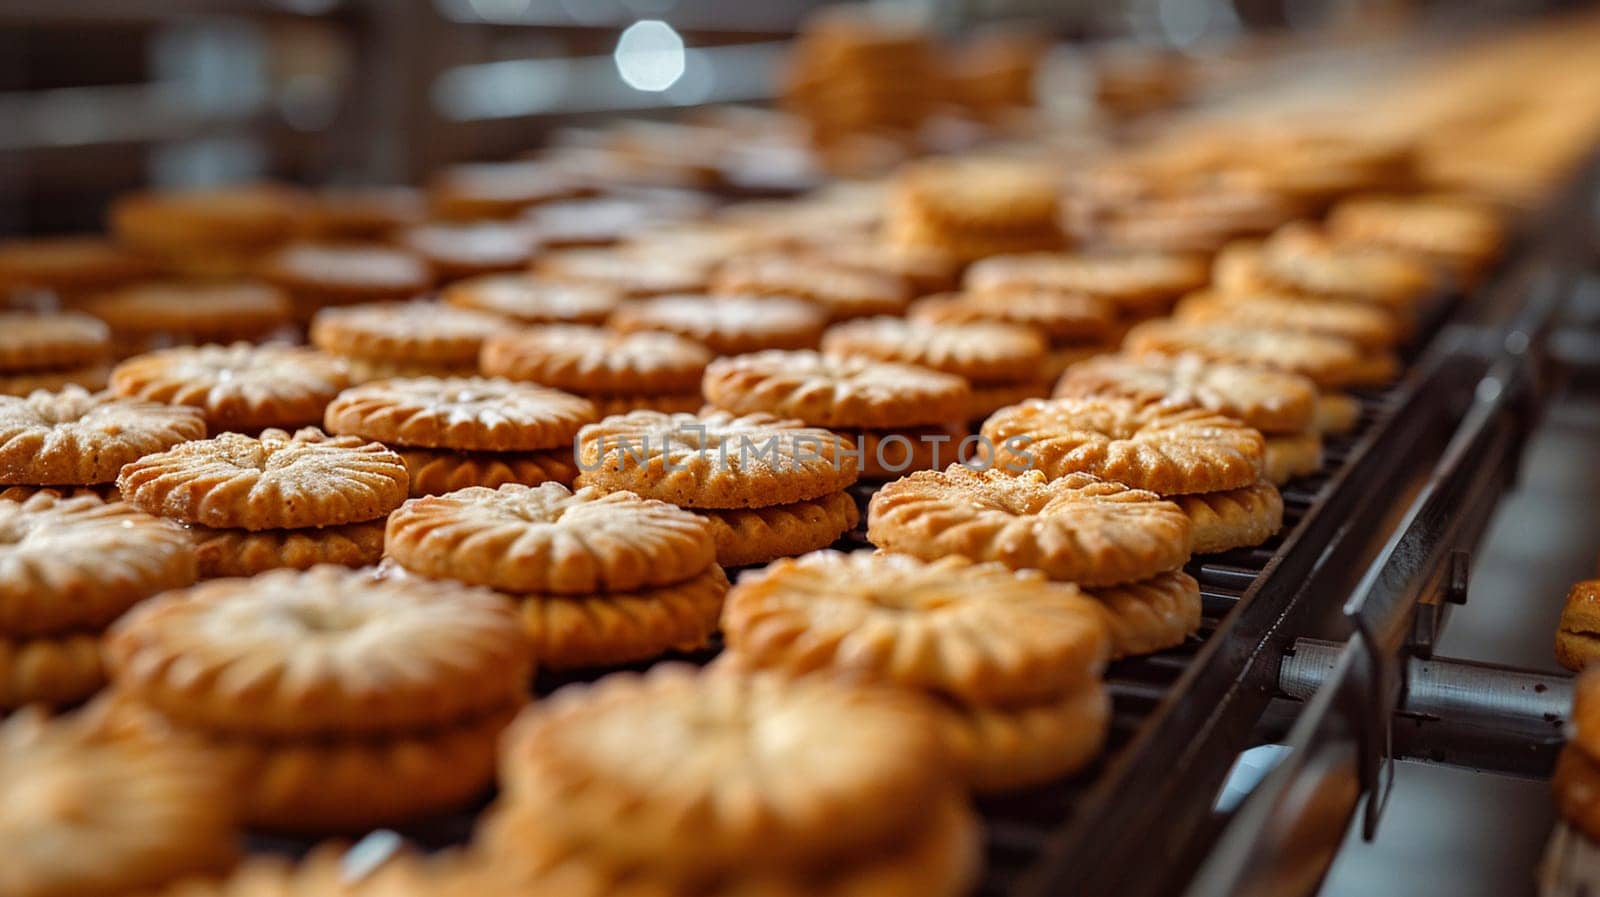 Golden cookies on industrial conveyor belt in food production line with warm tones showcasing manufacturing and mass production.